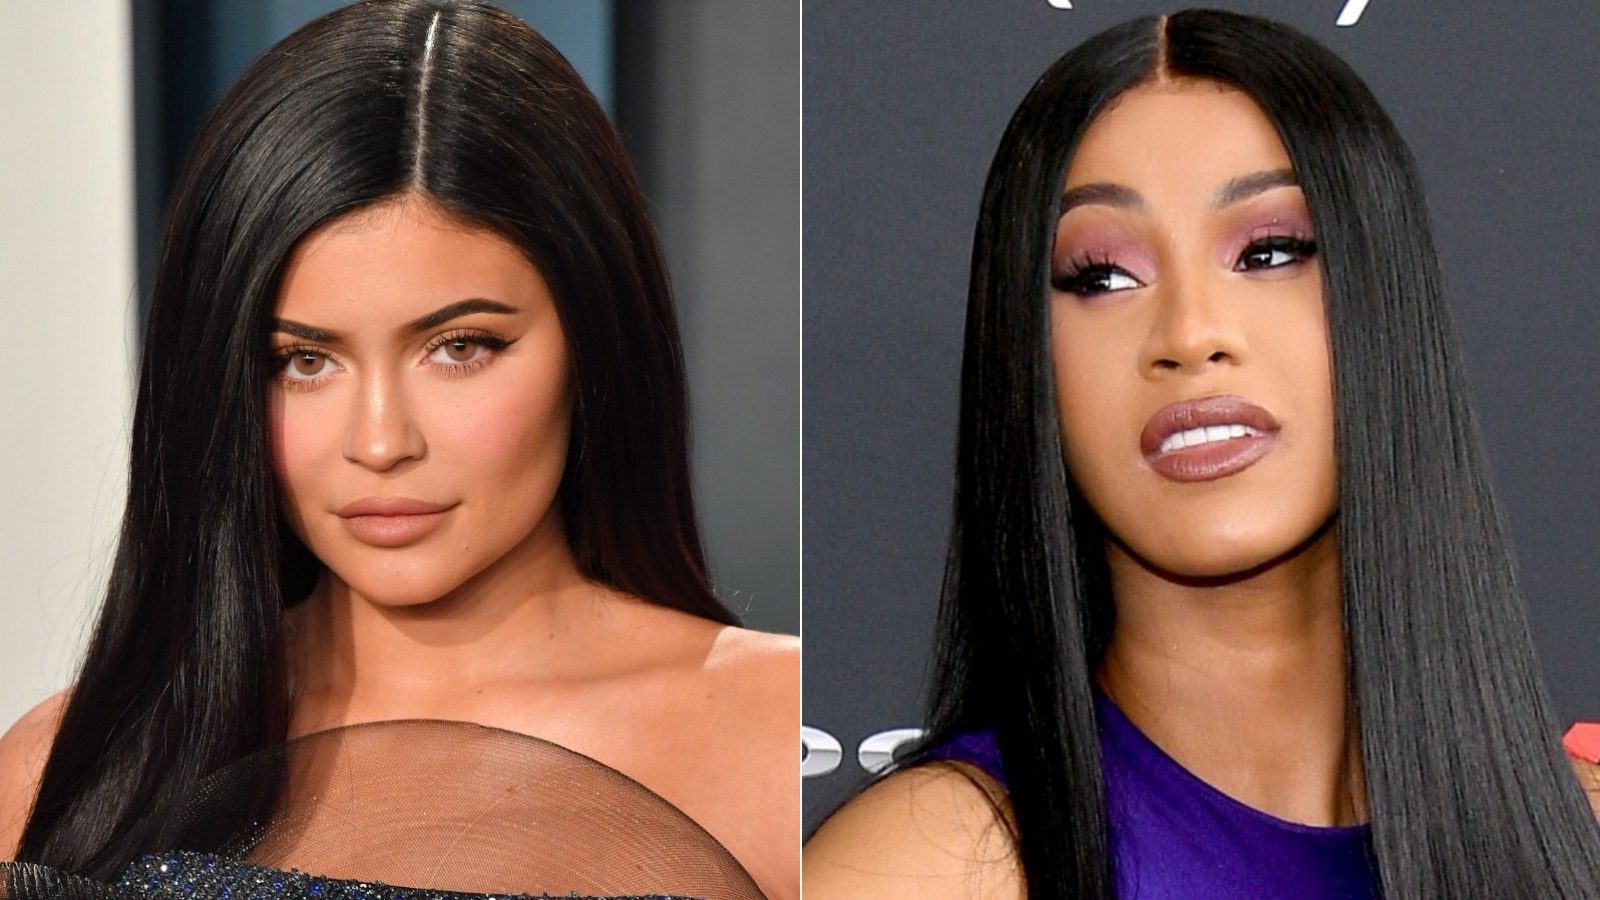 Kylie Jenner and Cardi B